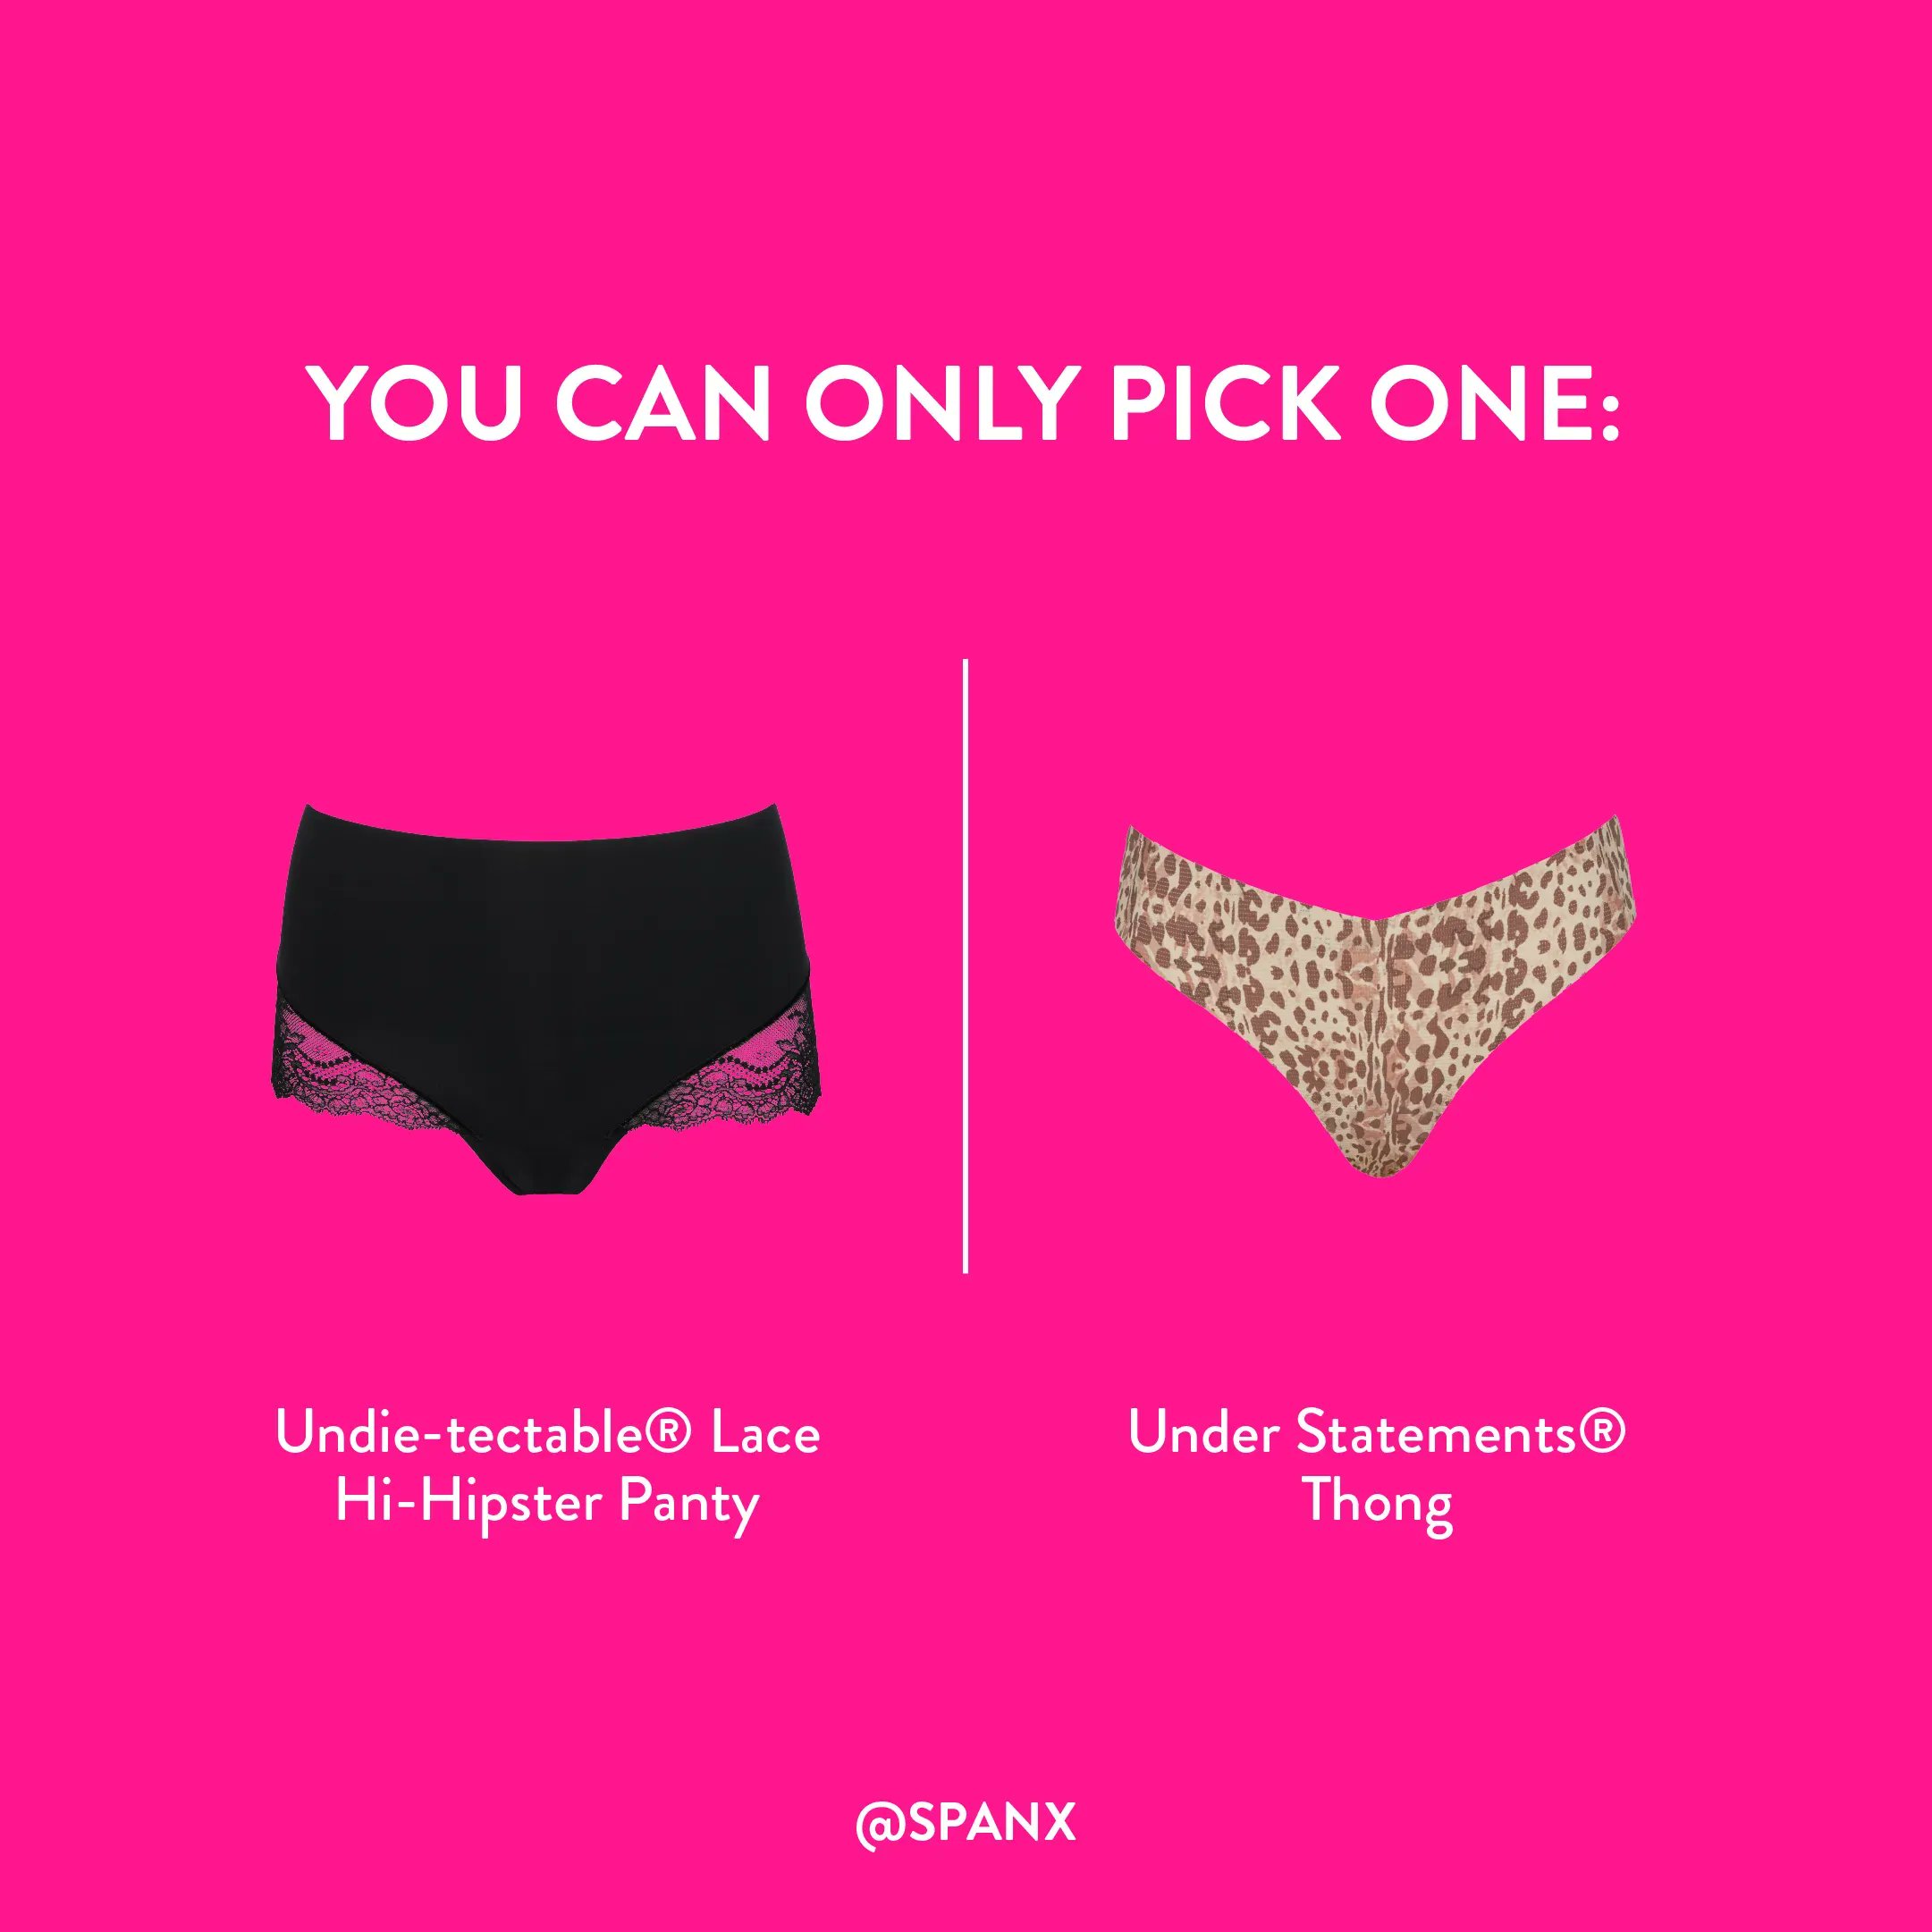 SPANX on X: Your underwear drawer can only pick one: Under